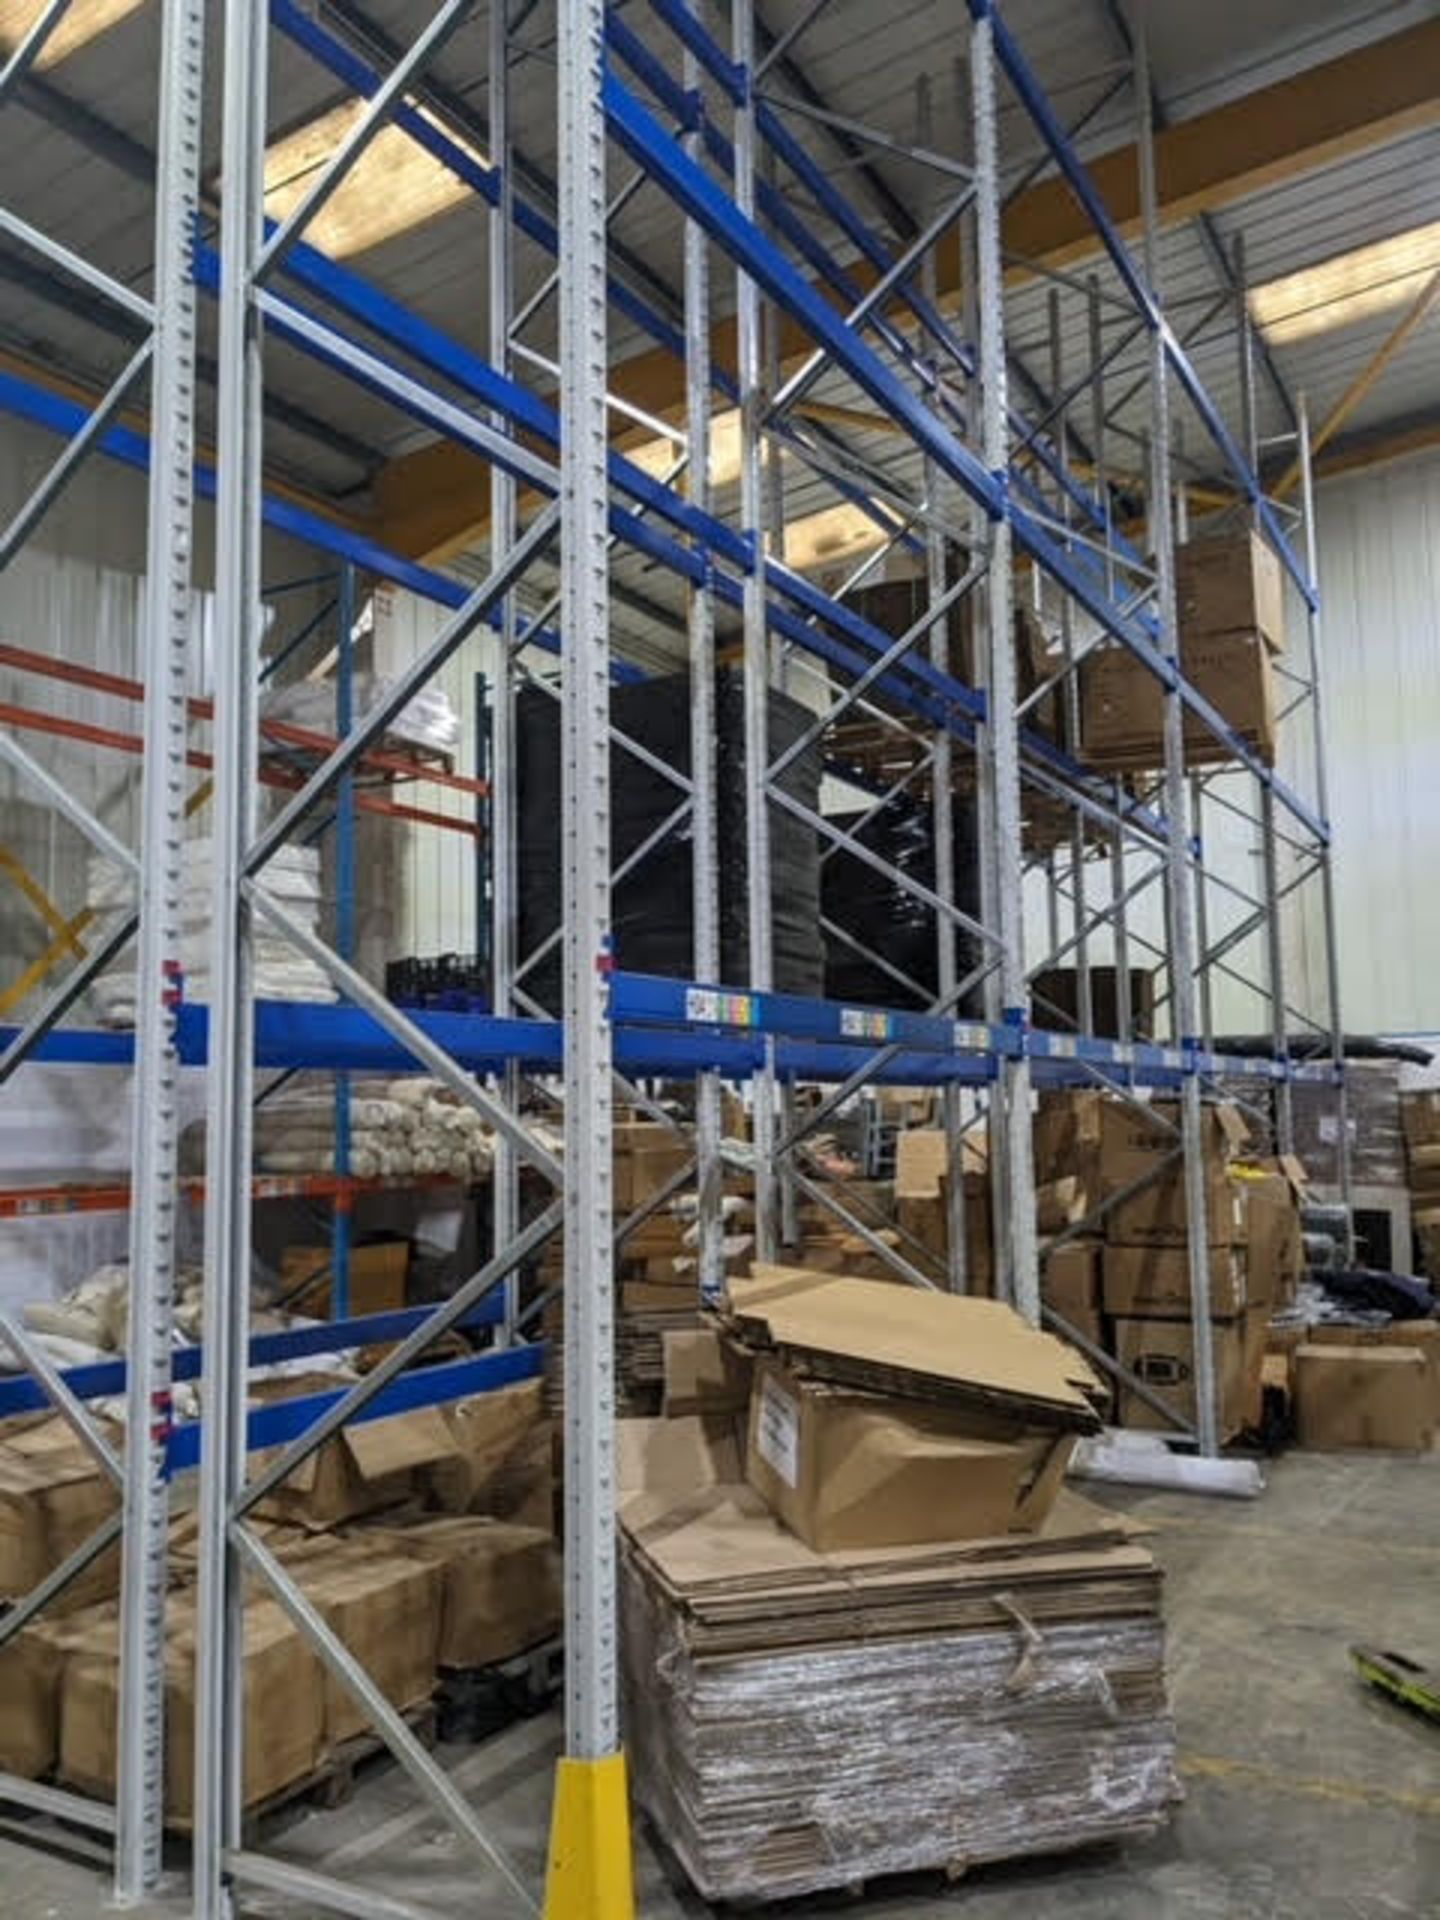 10 X BAYS OF APEX RACKING 8 BEAMS PER BAY, 8M UPRIGHTS, 1100MM DEEP, 2700MM WIDE BEAMS WITH LOCKING